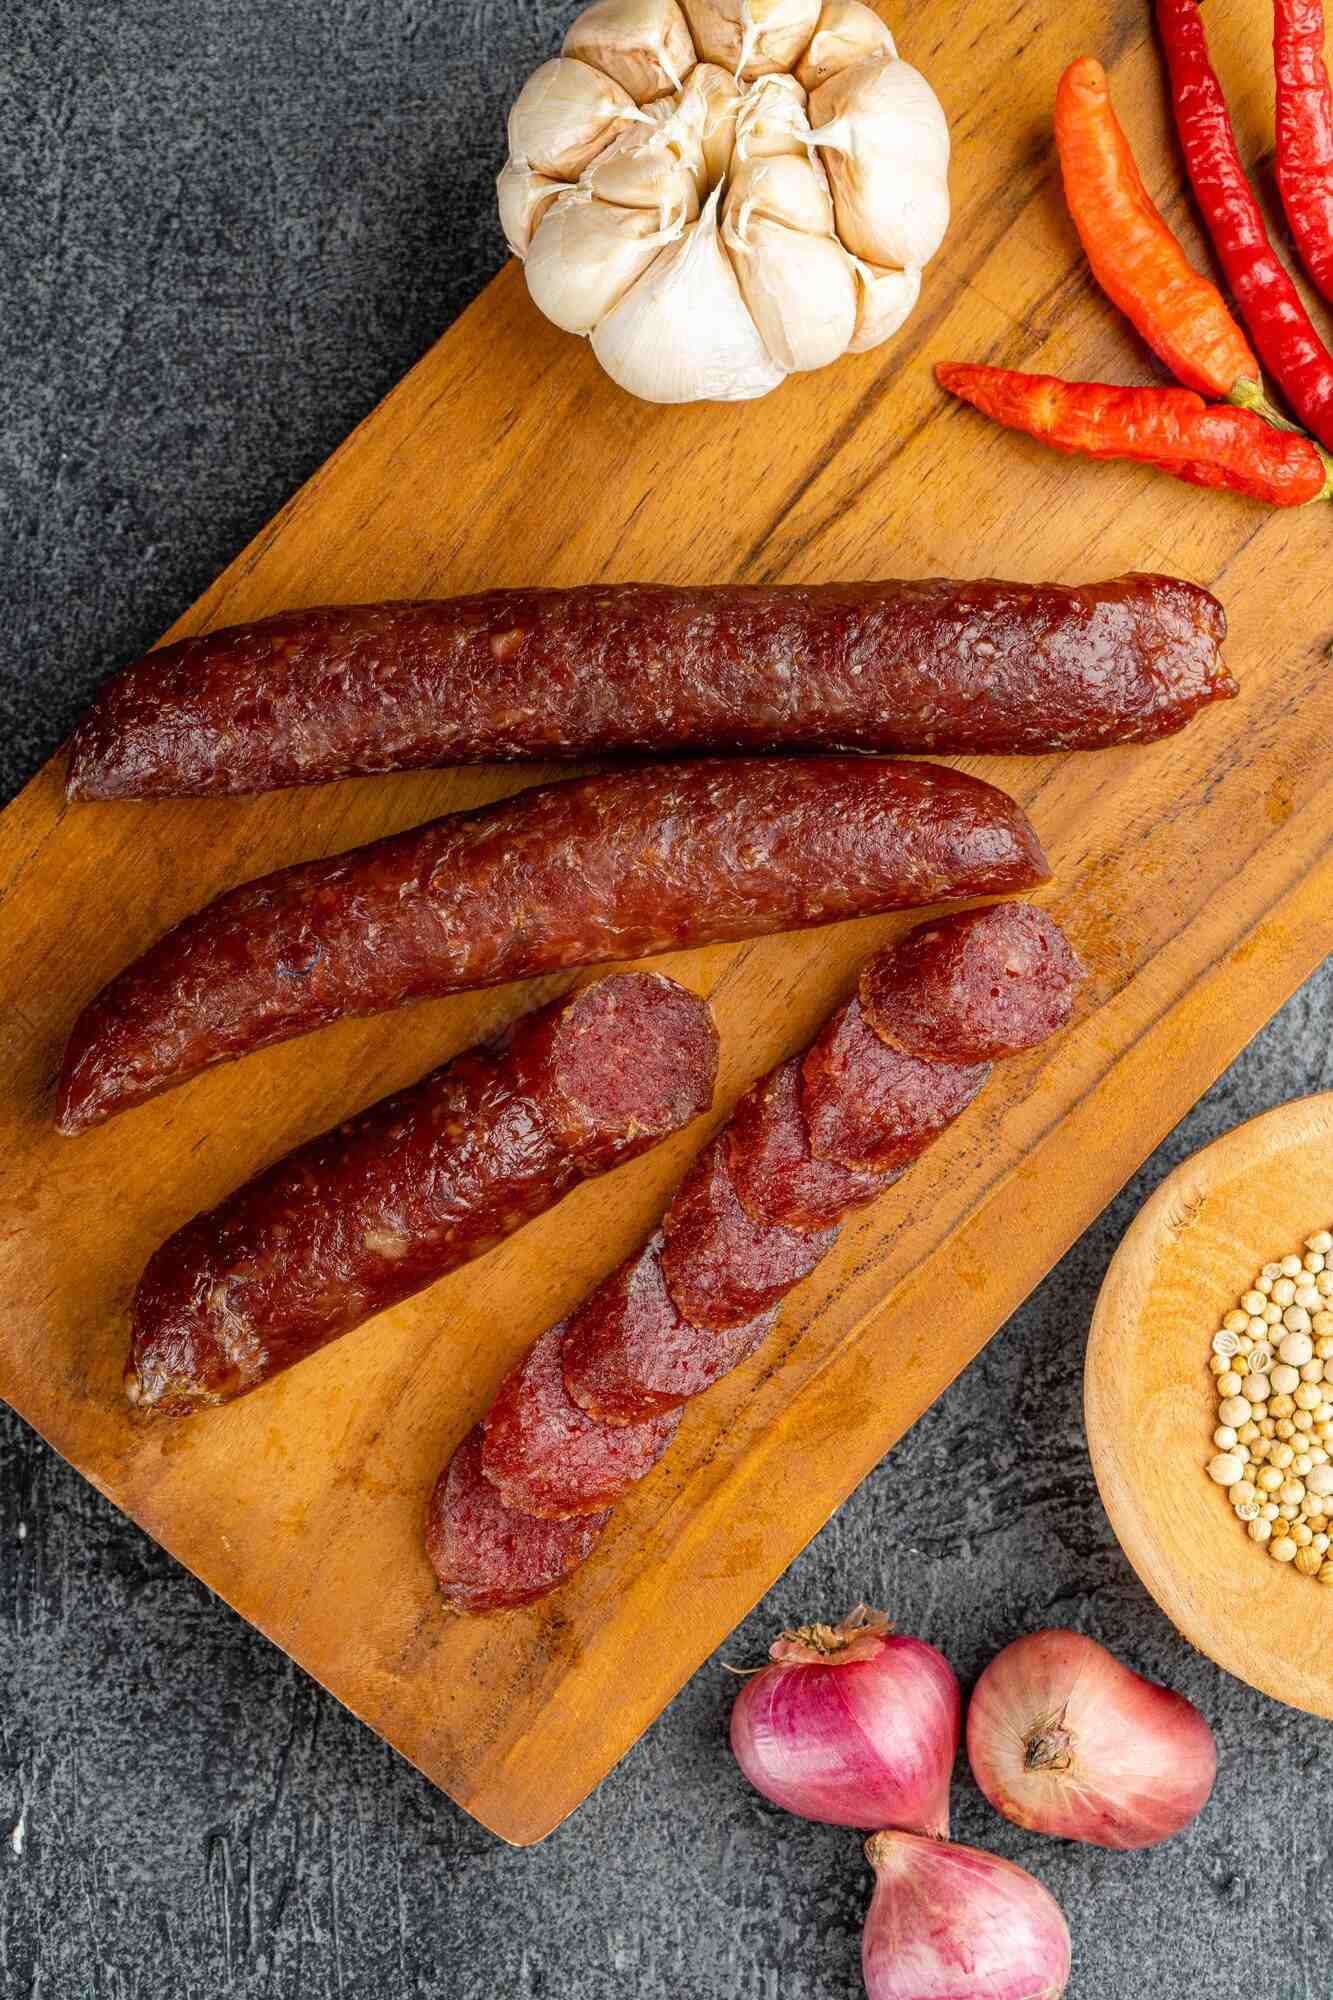 Can I eat Chinese sausage on keto?